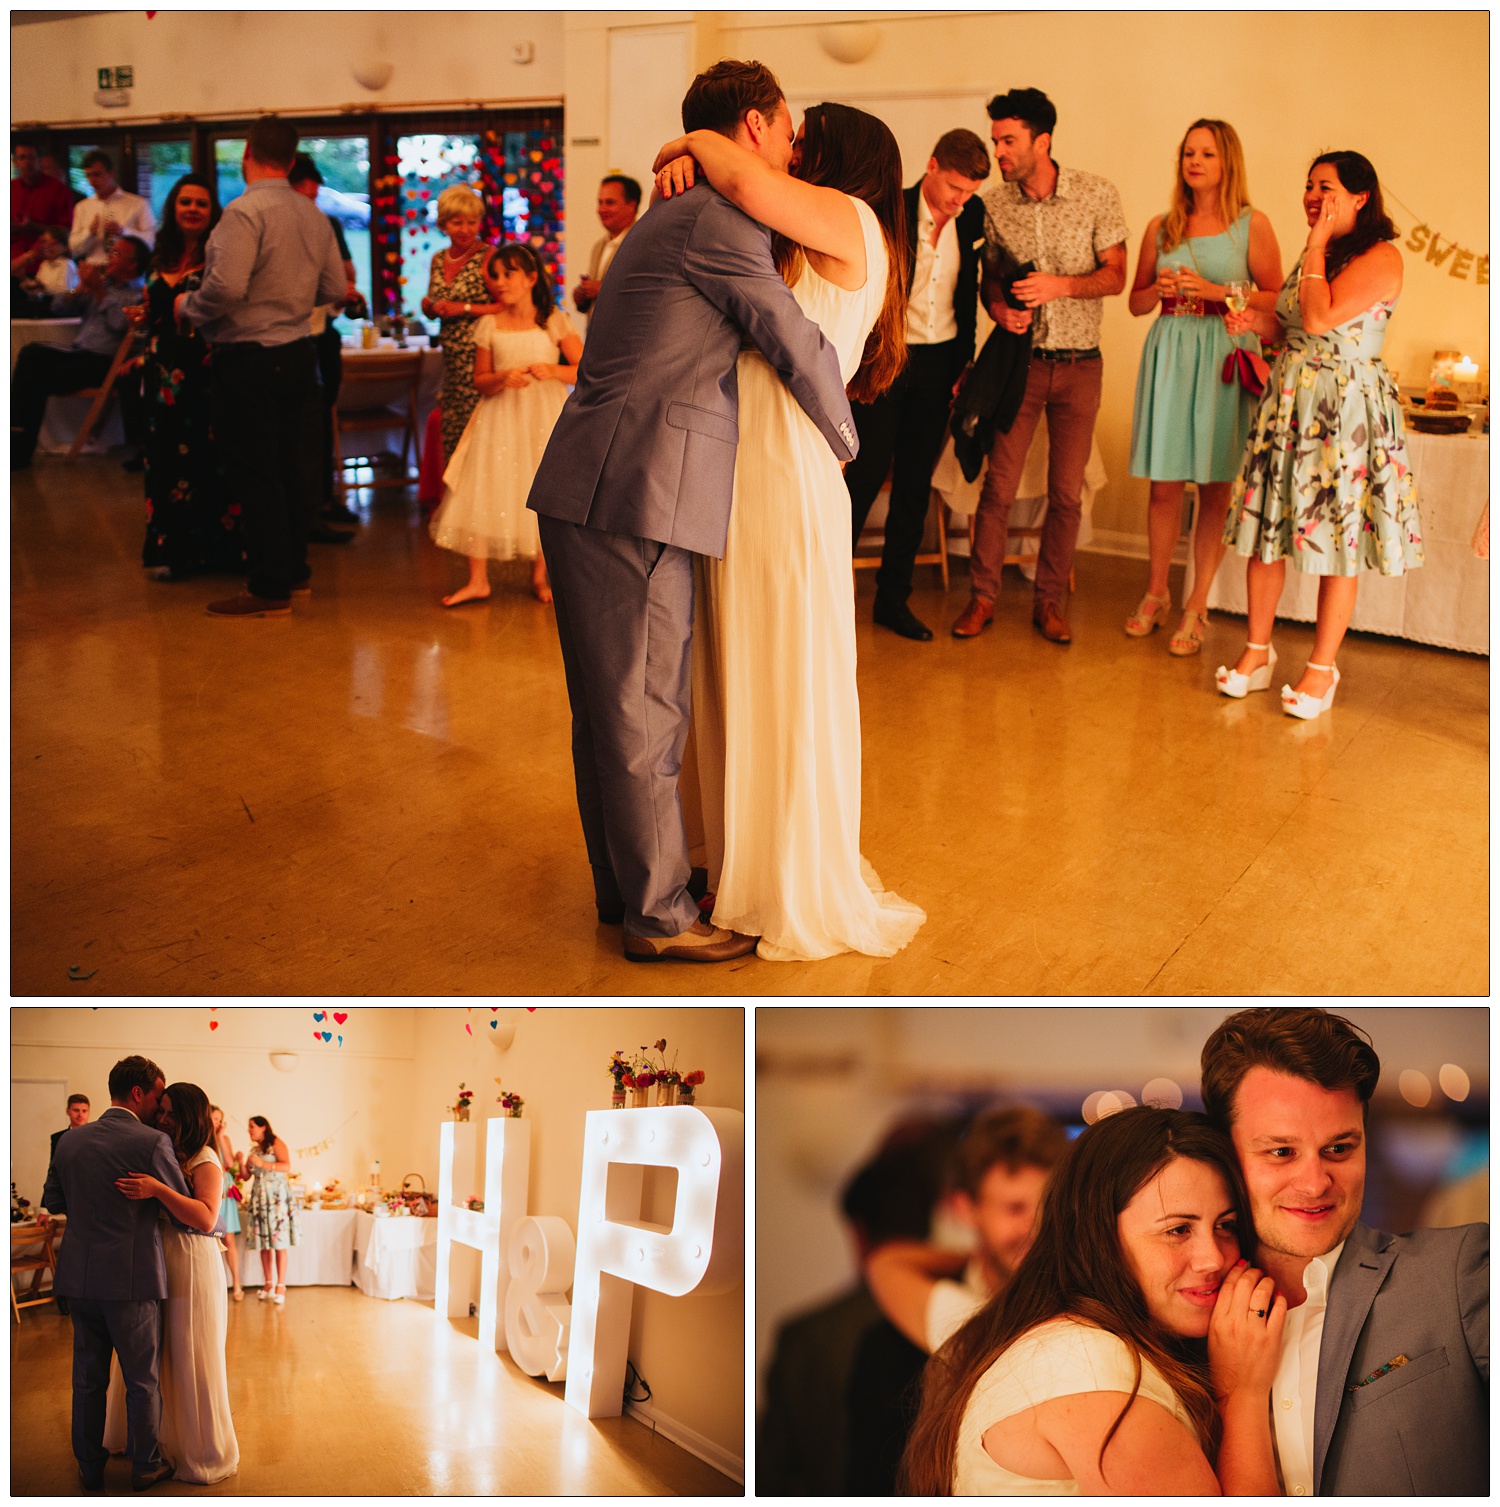 First dance at a wedding reception in a Sussex village hall.